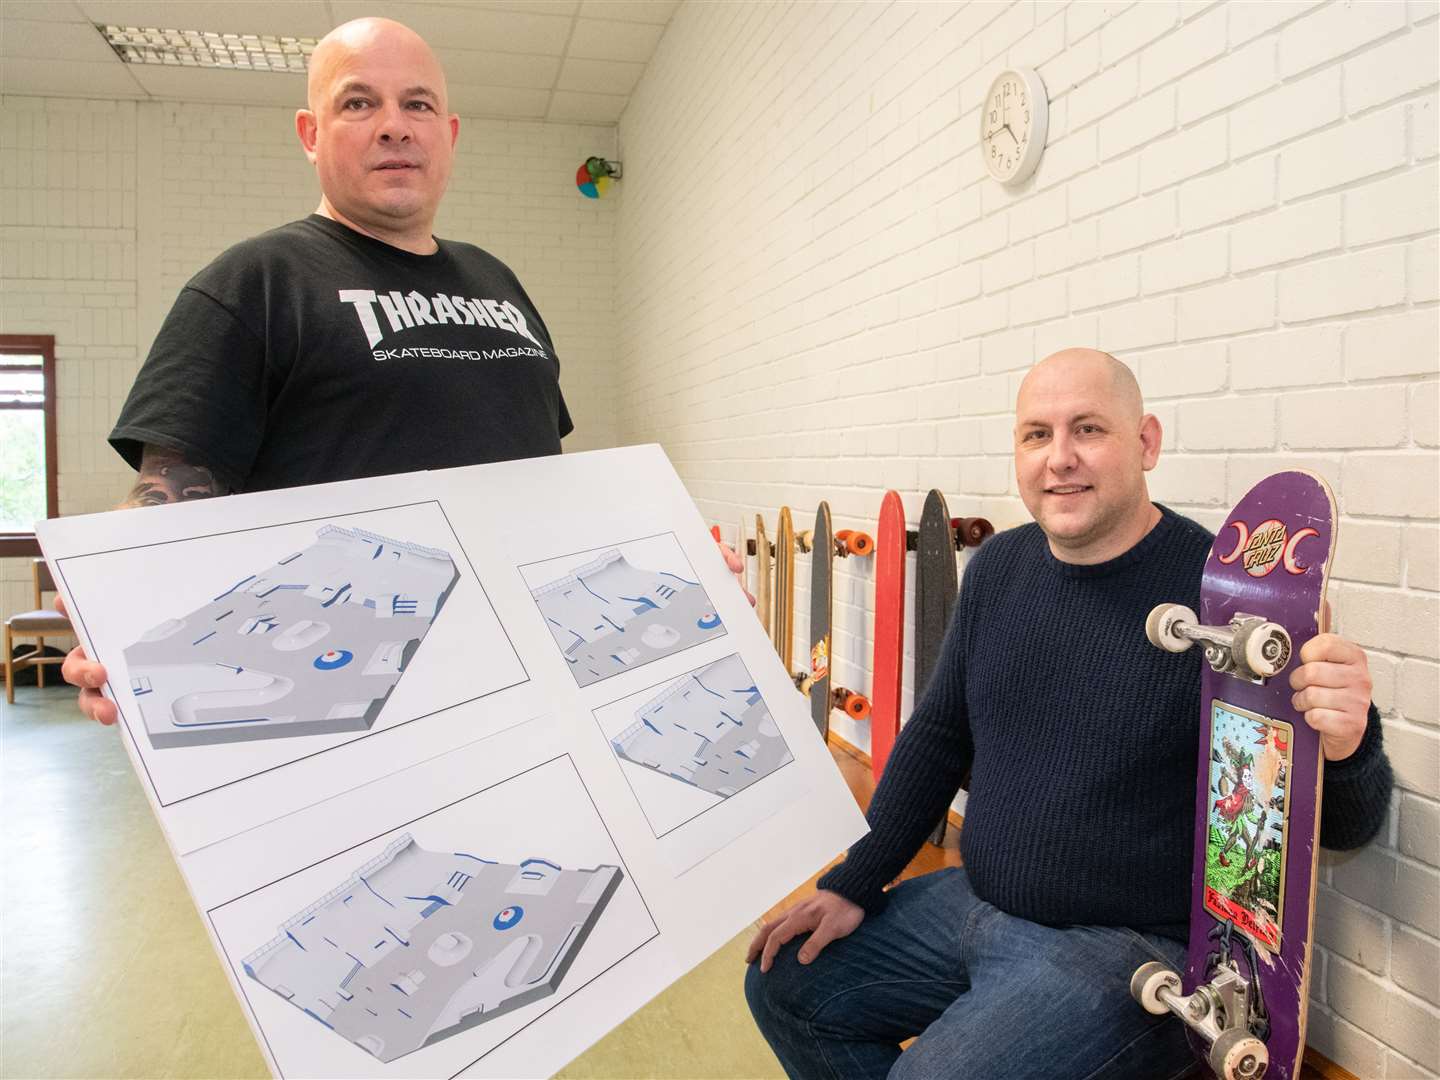 Organisers Nikk Horne (left) and Shaun Moat with the new plans for a skate park in Forres.